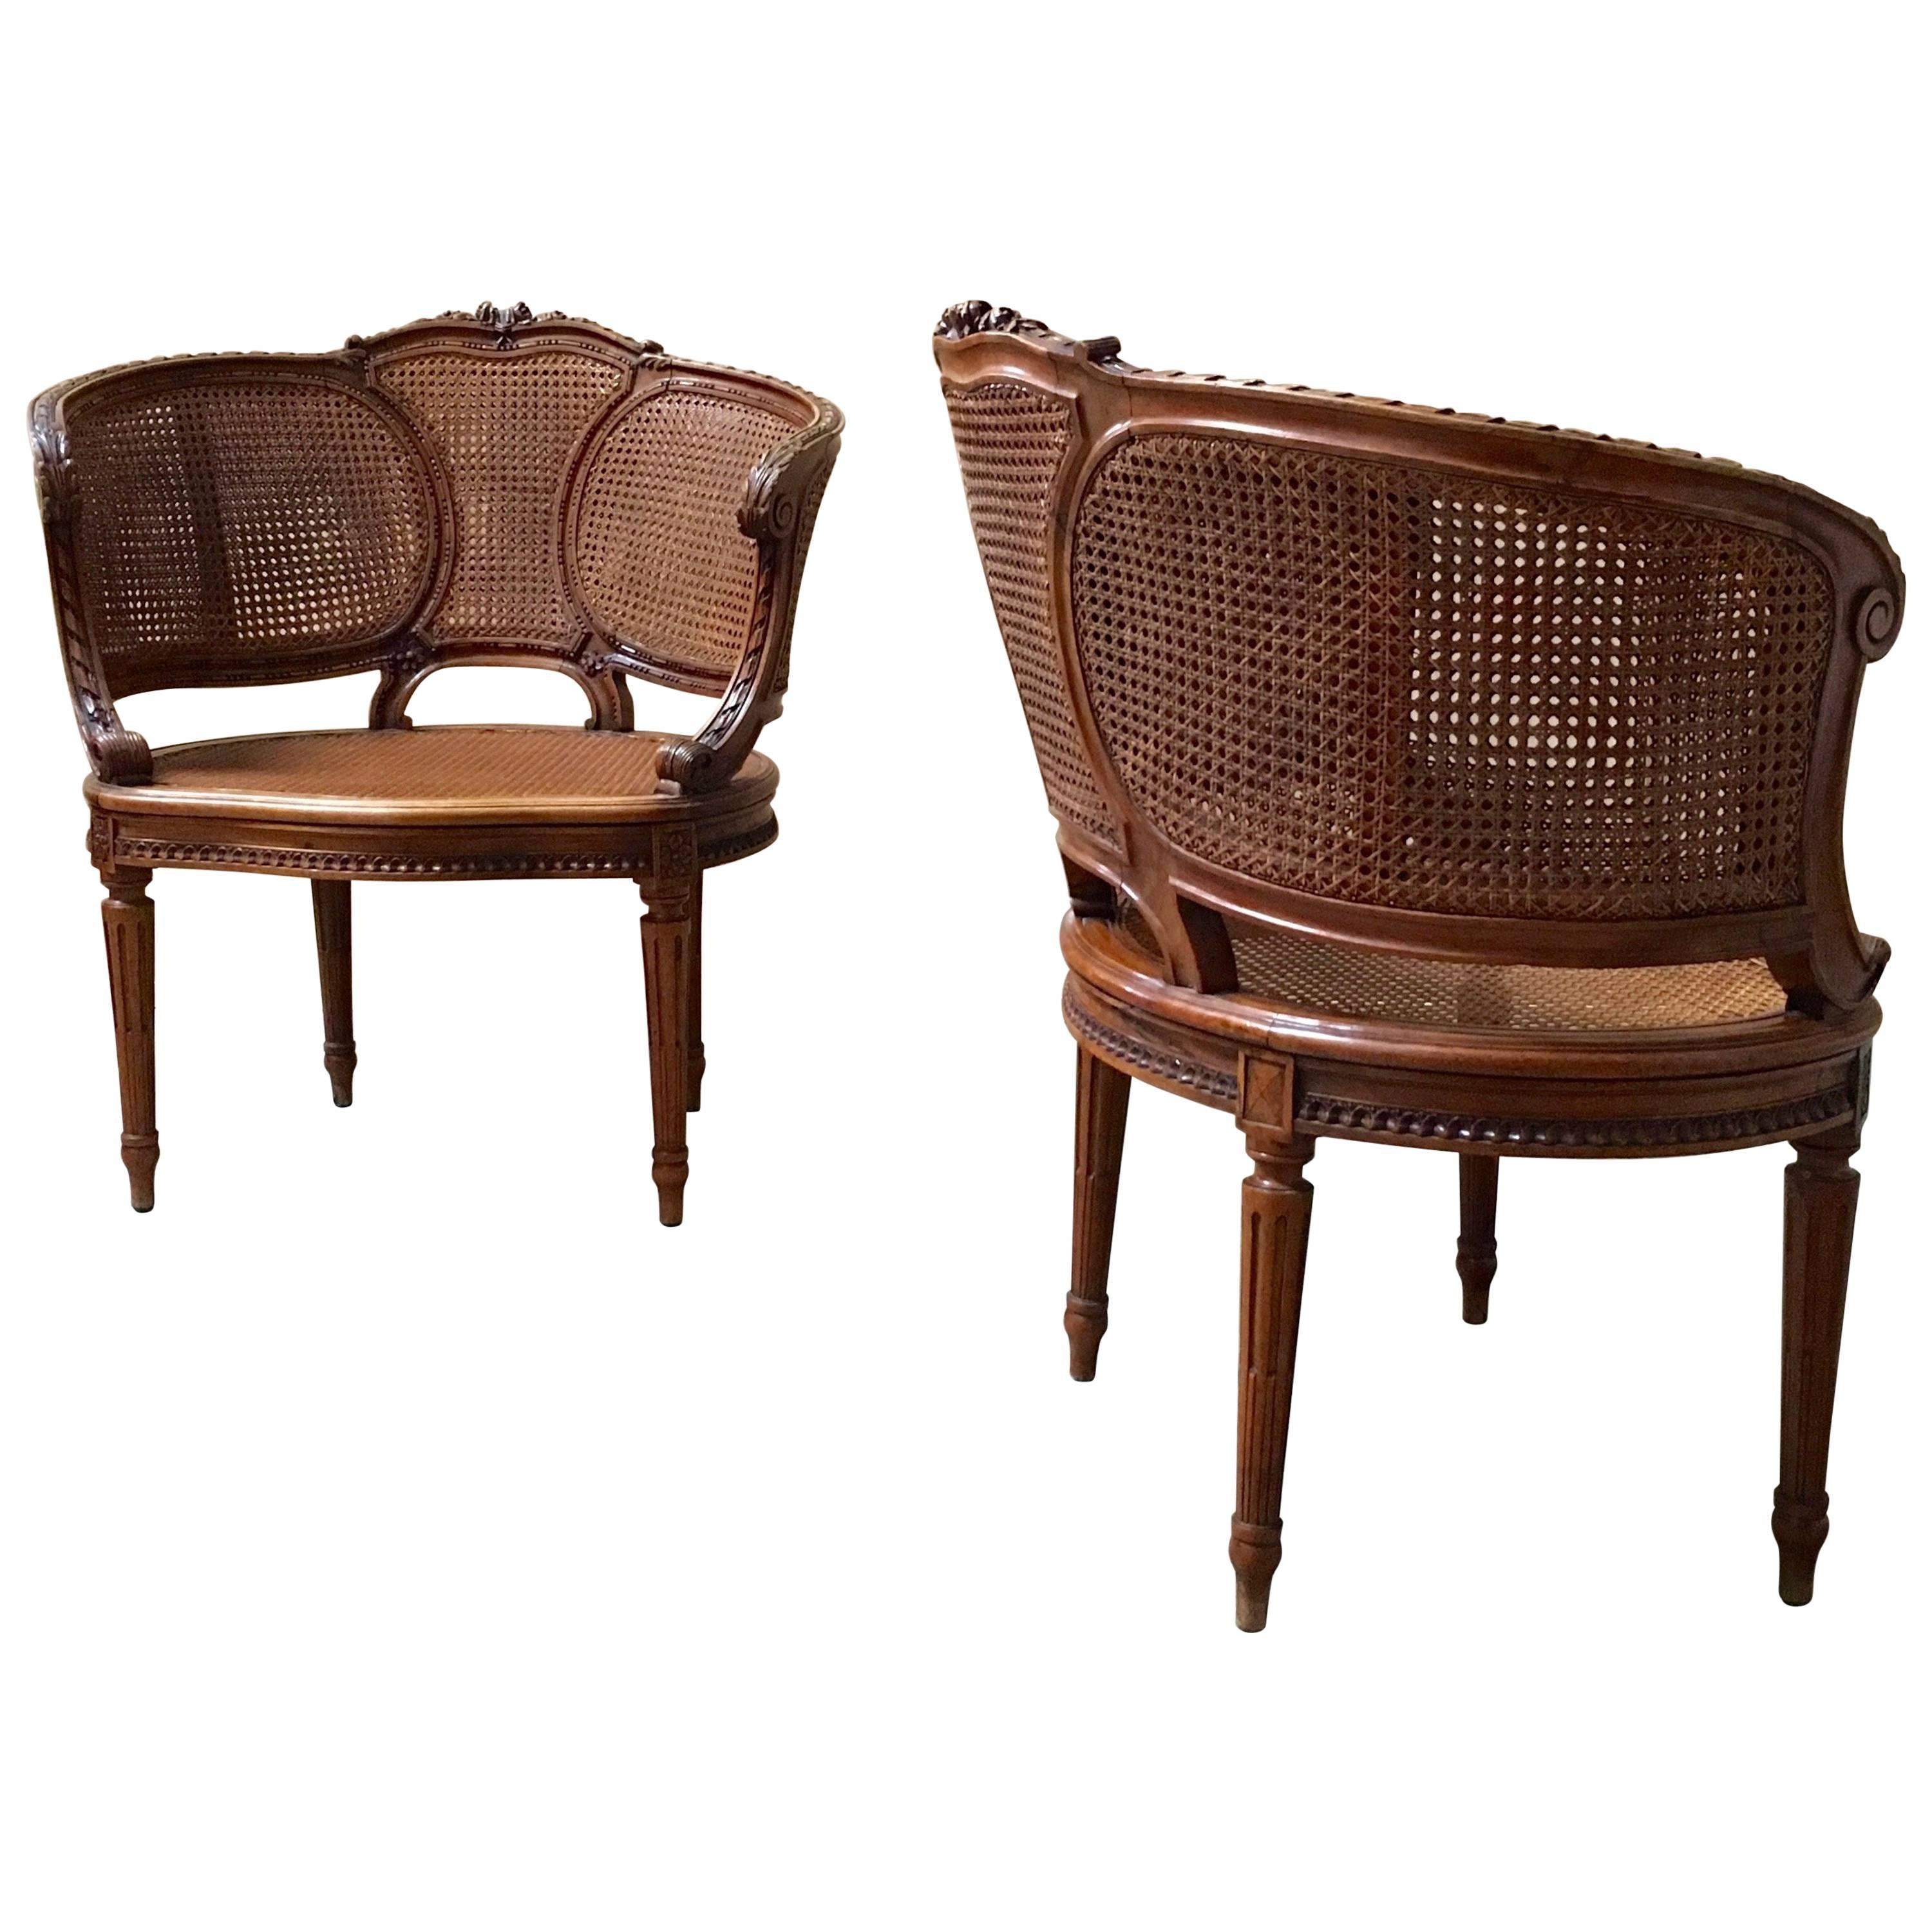 Louis XVI Style Double Cane Chairs